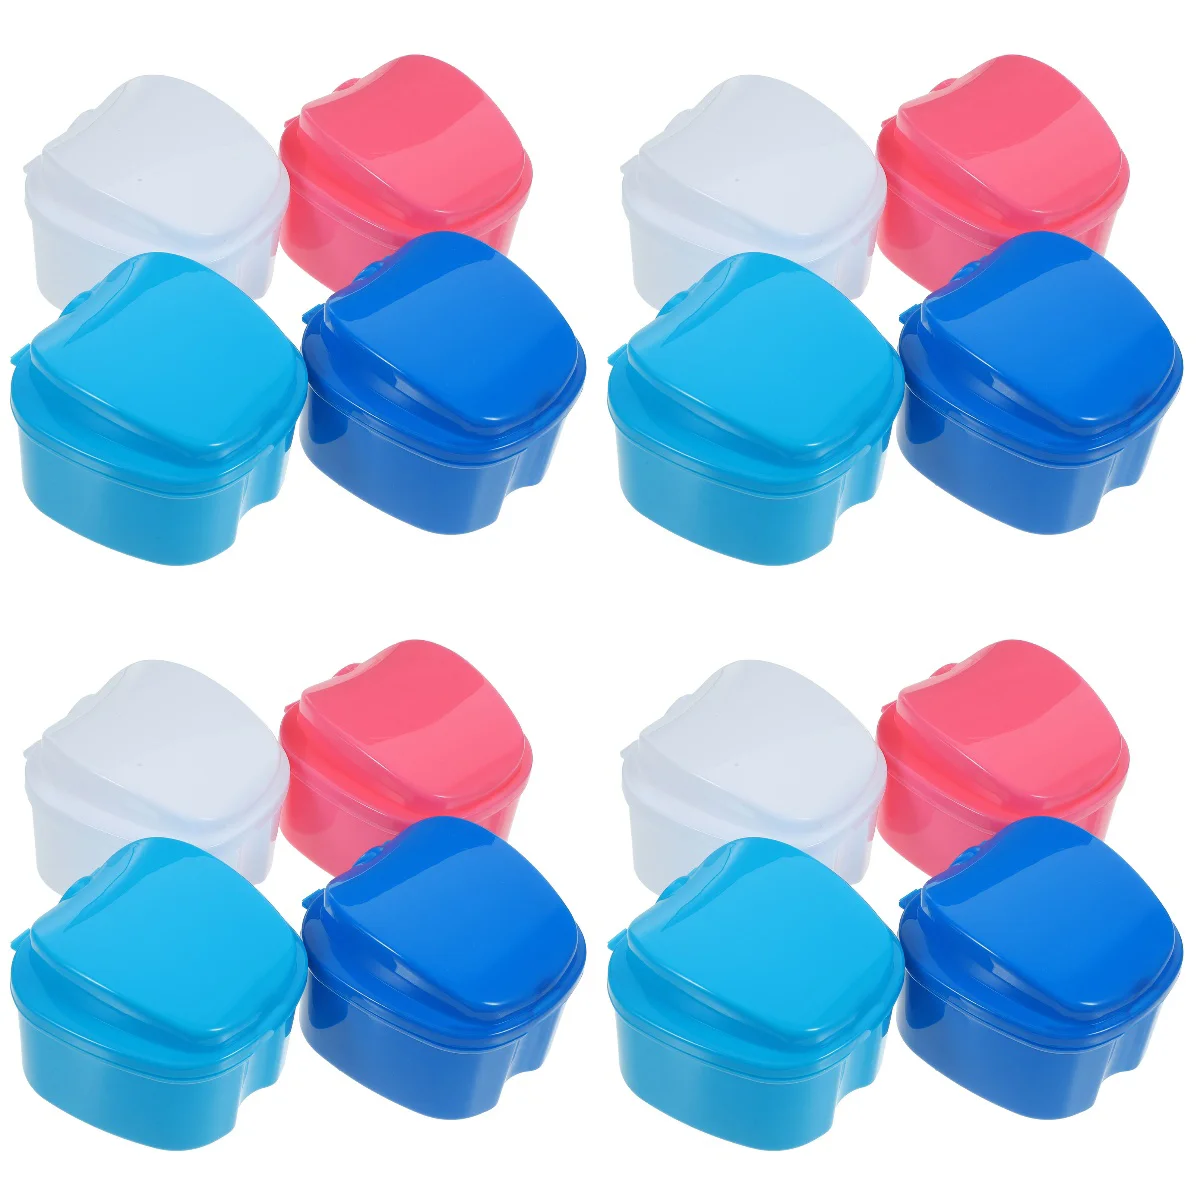 

16 Pcs Accessories Denture Filter Layer Outdoor Retainer Case Container Storage 9.6X9X6.8CM Abs Portable Cup Miss